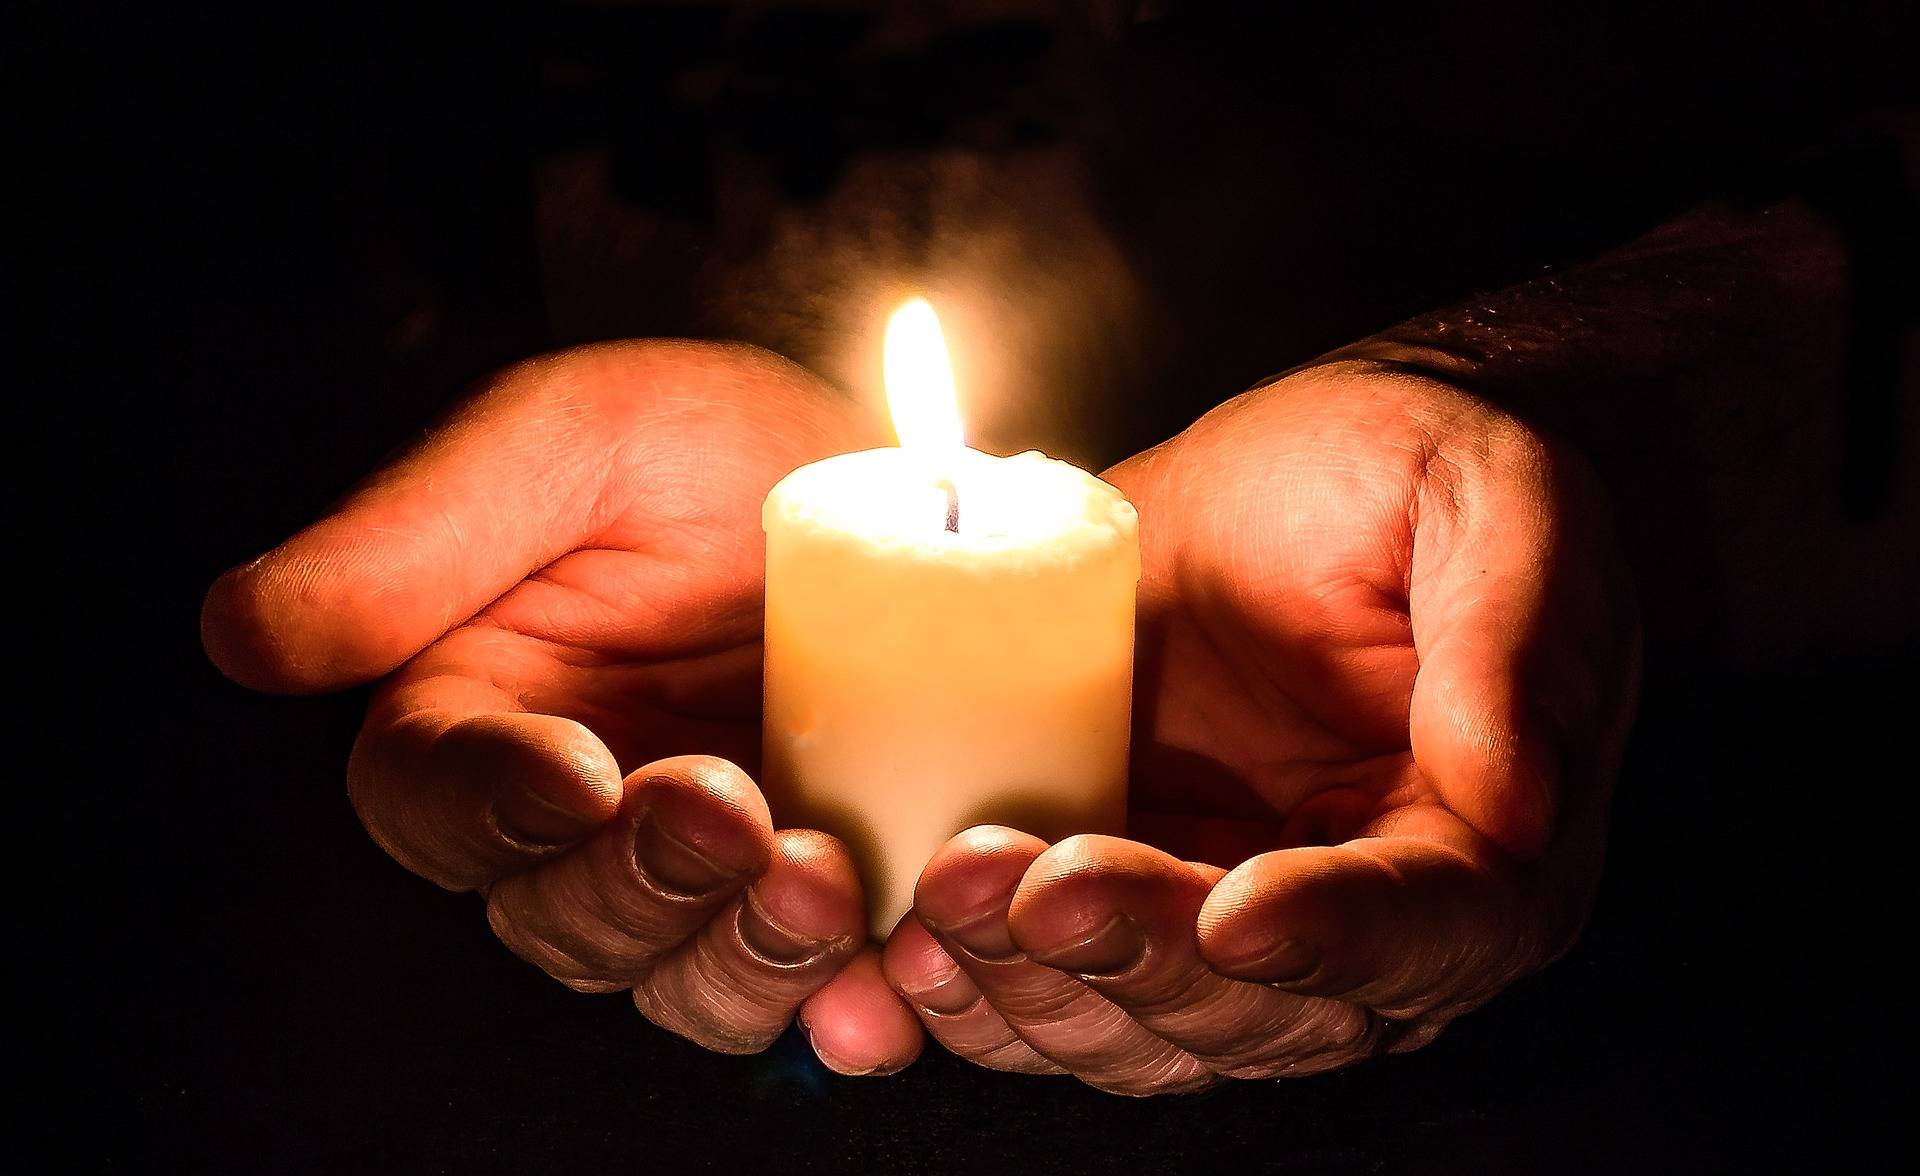 Compassionate candle lighting | Journal of the Juan Islands